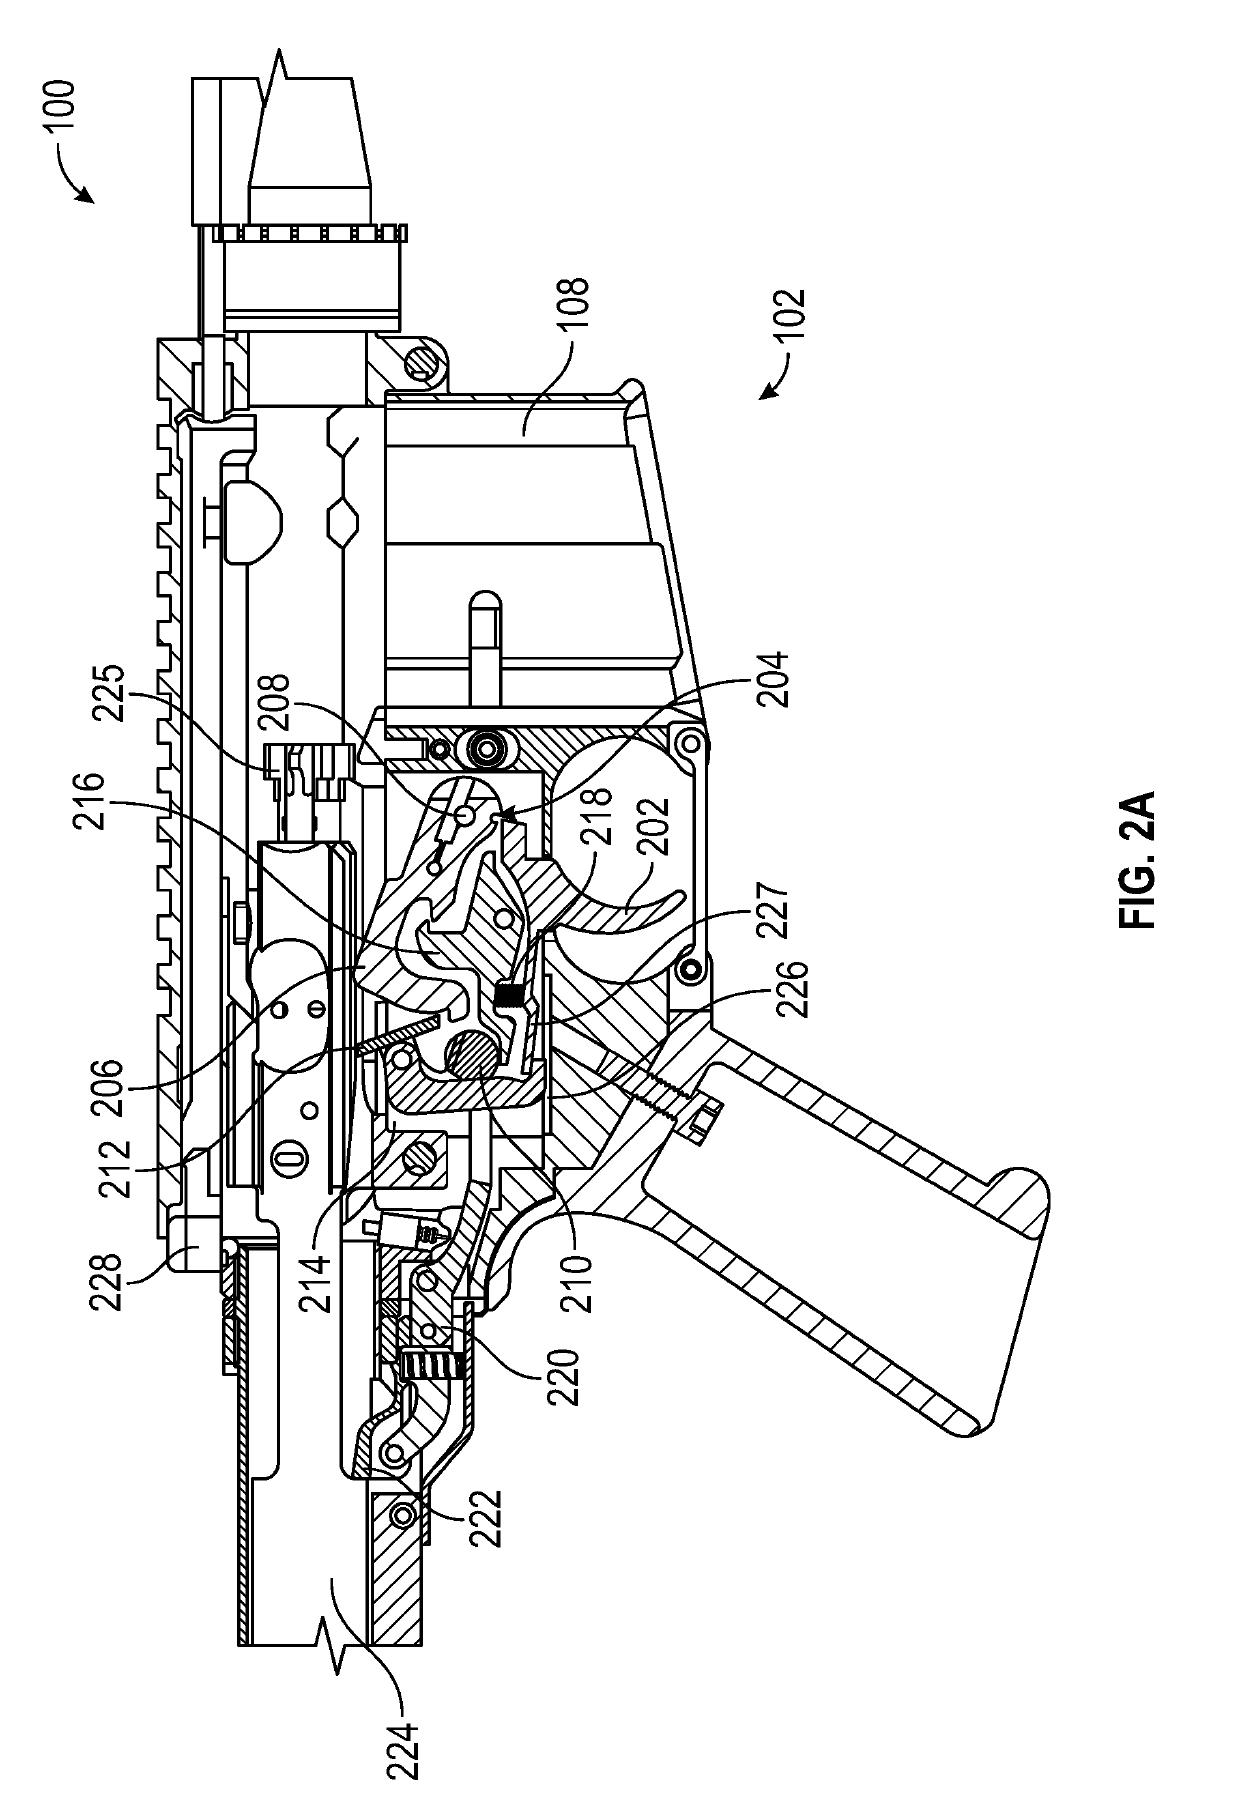 Selective fire firearm systems and methods